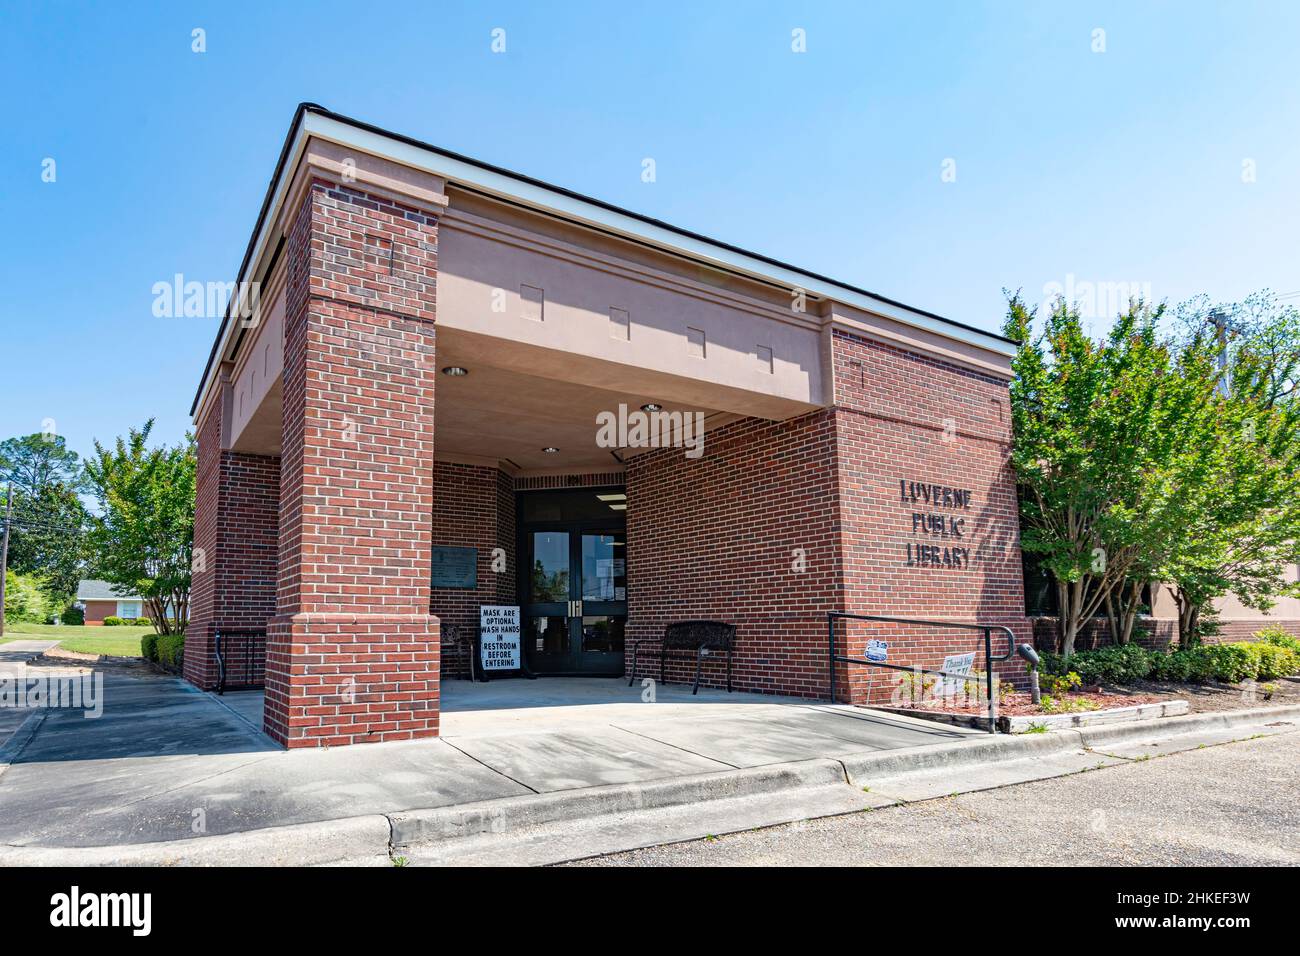 Luverne, Alabama, USA- April 21, 2021: Entrance to the Luverne Public Library. Stock Photo